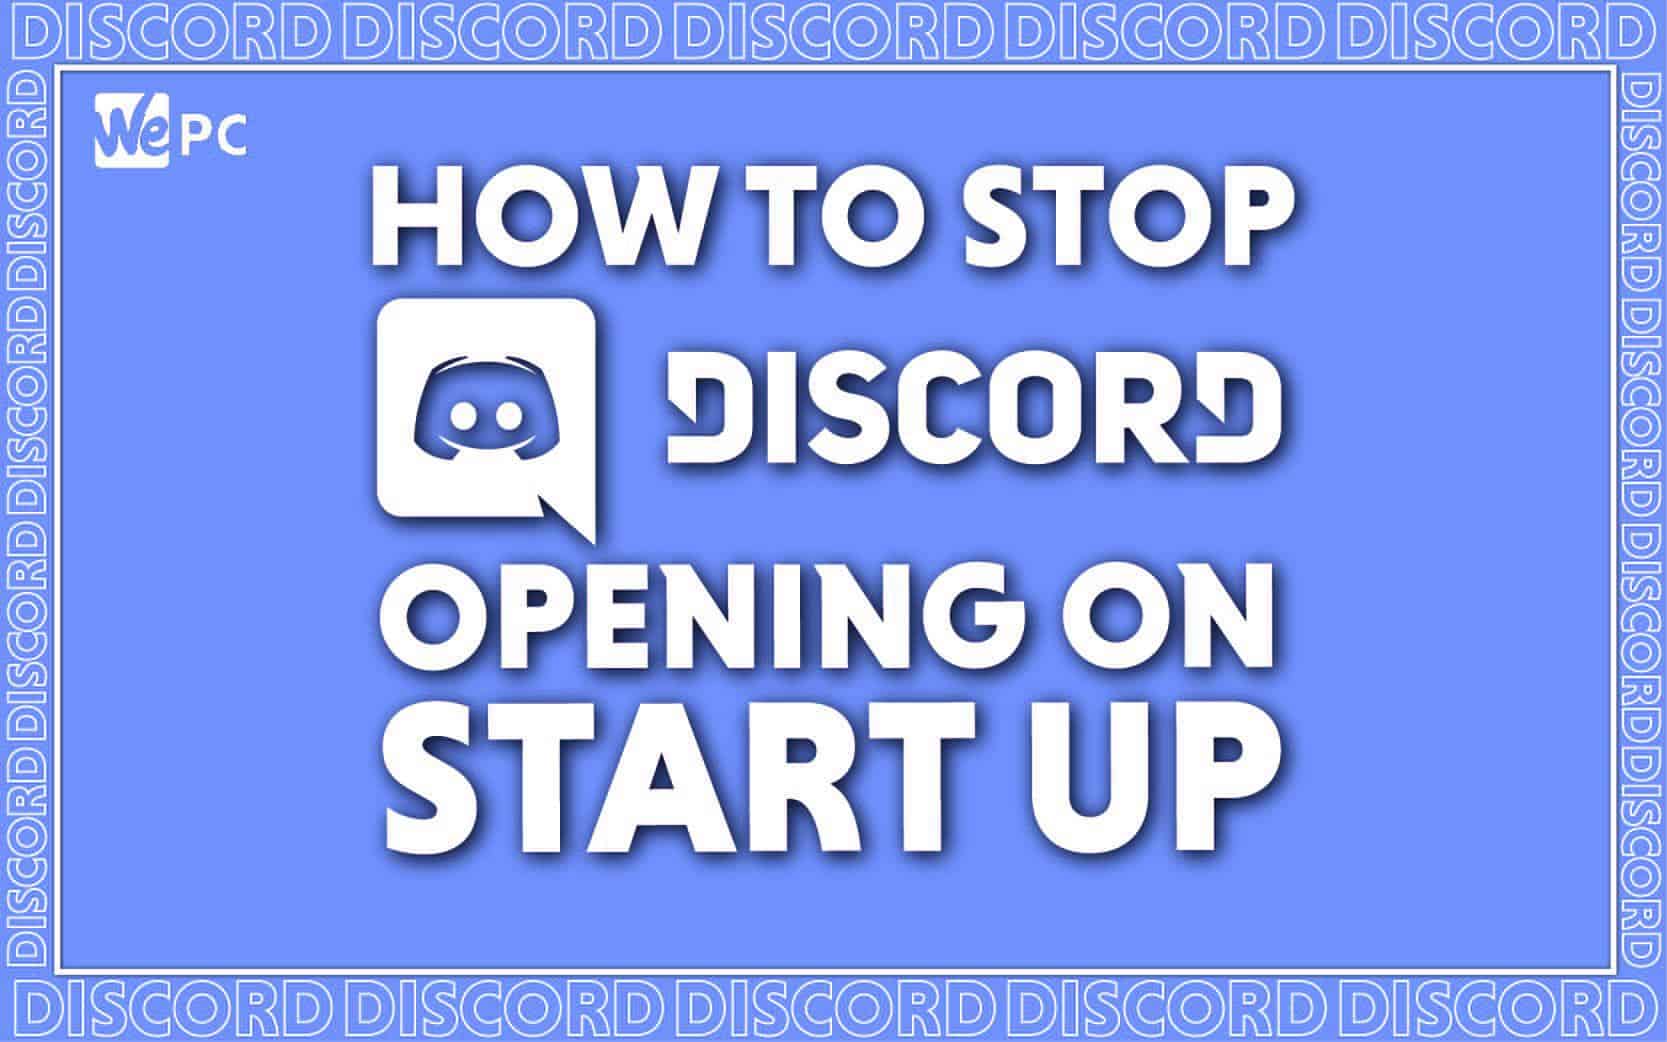 How to stop Discord from opening on startup – our guide for Mac and Windows